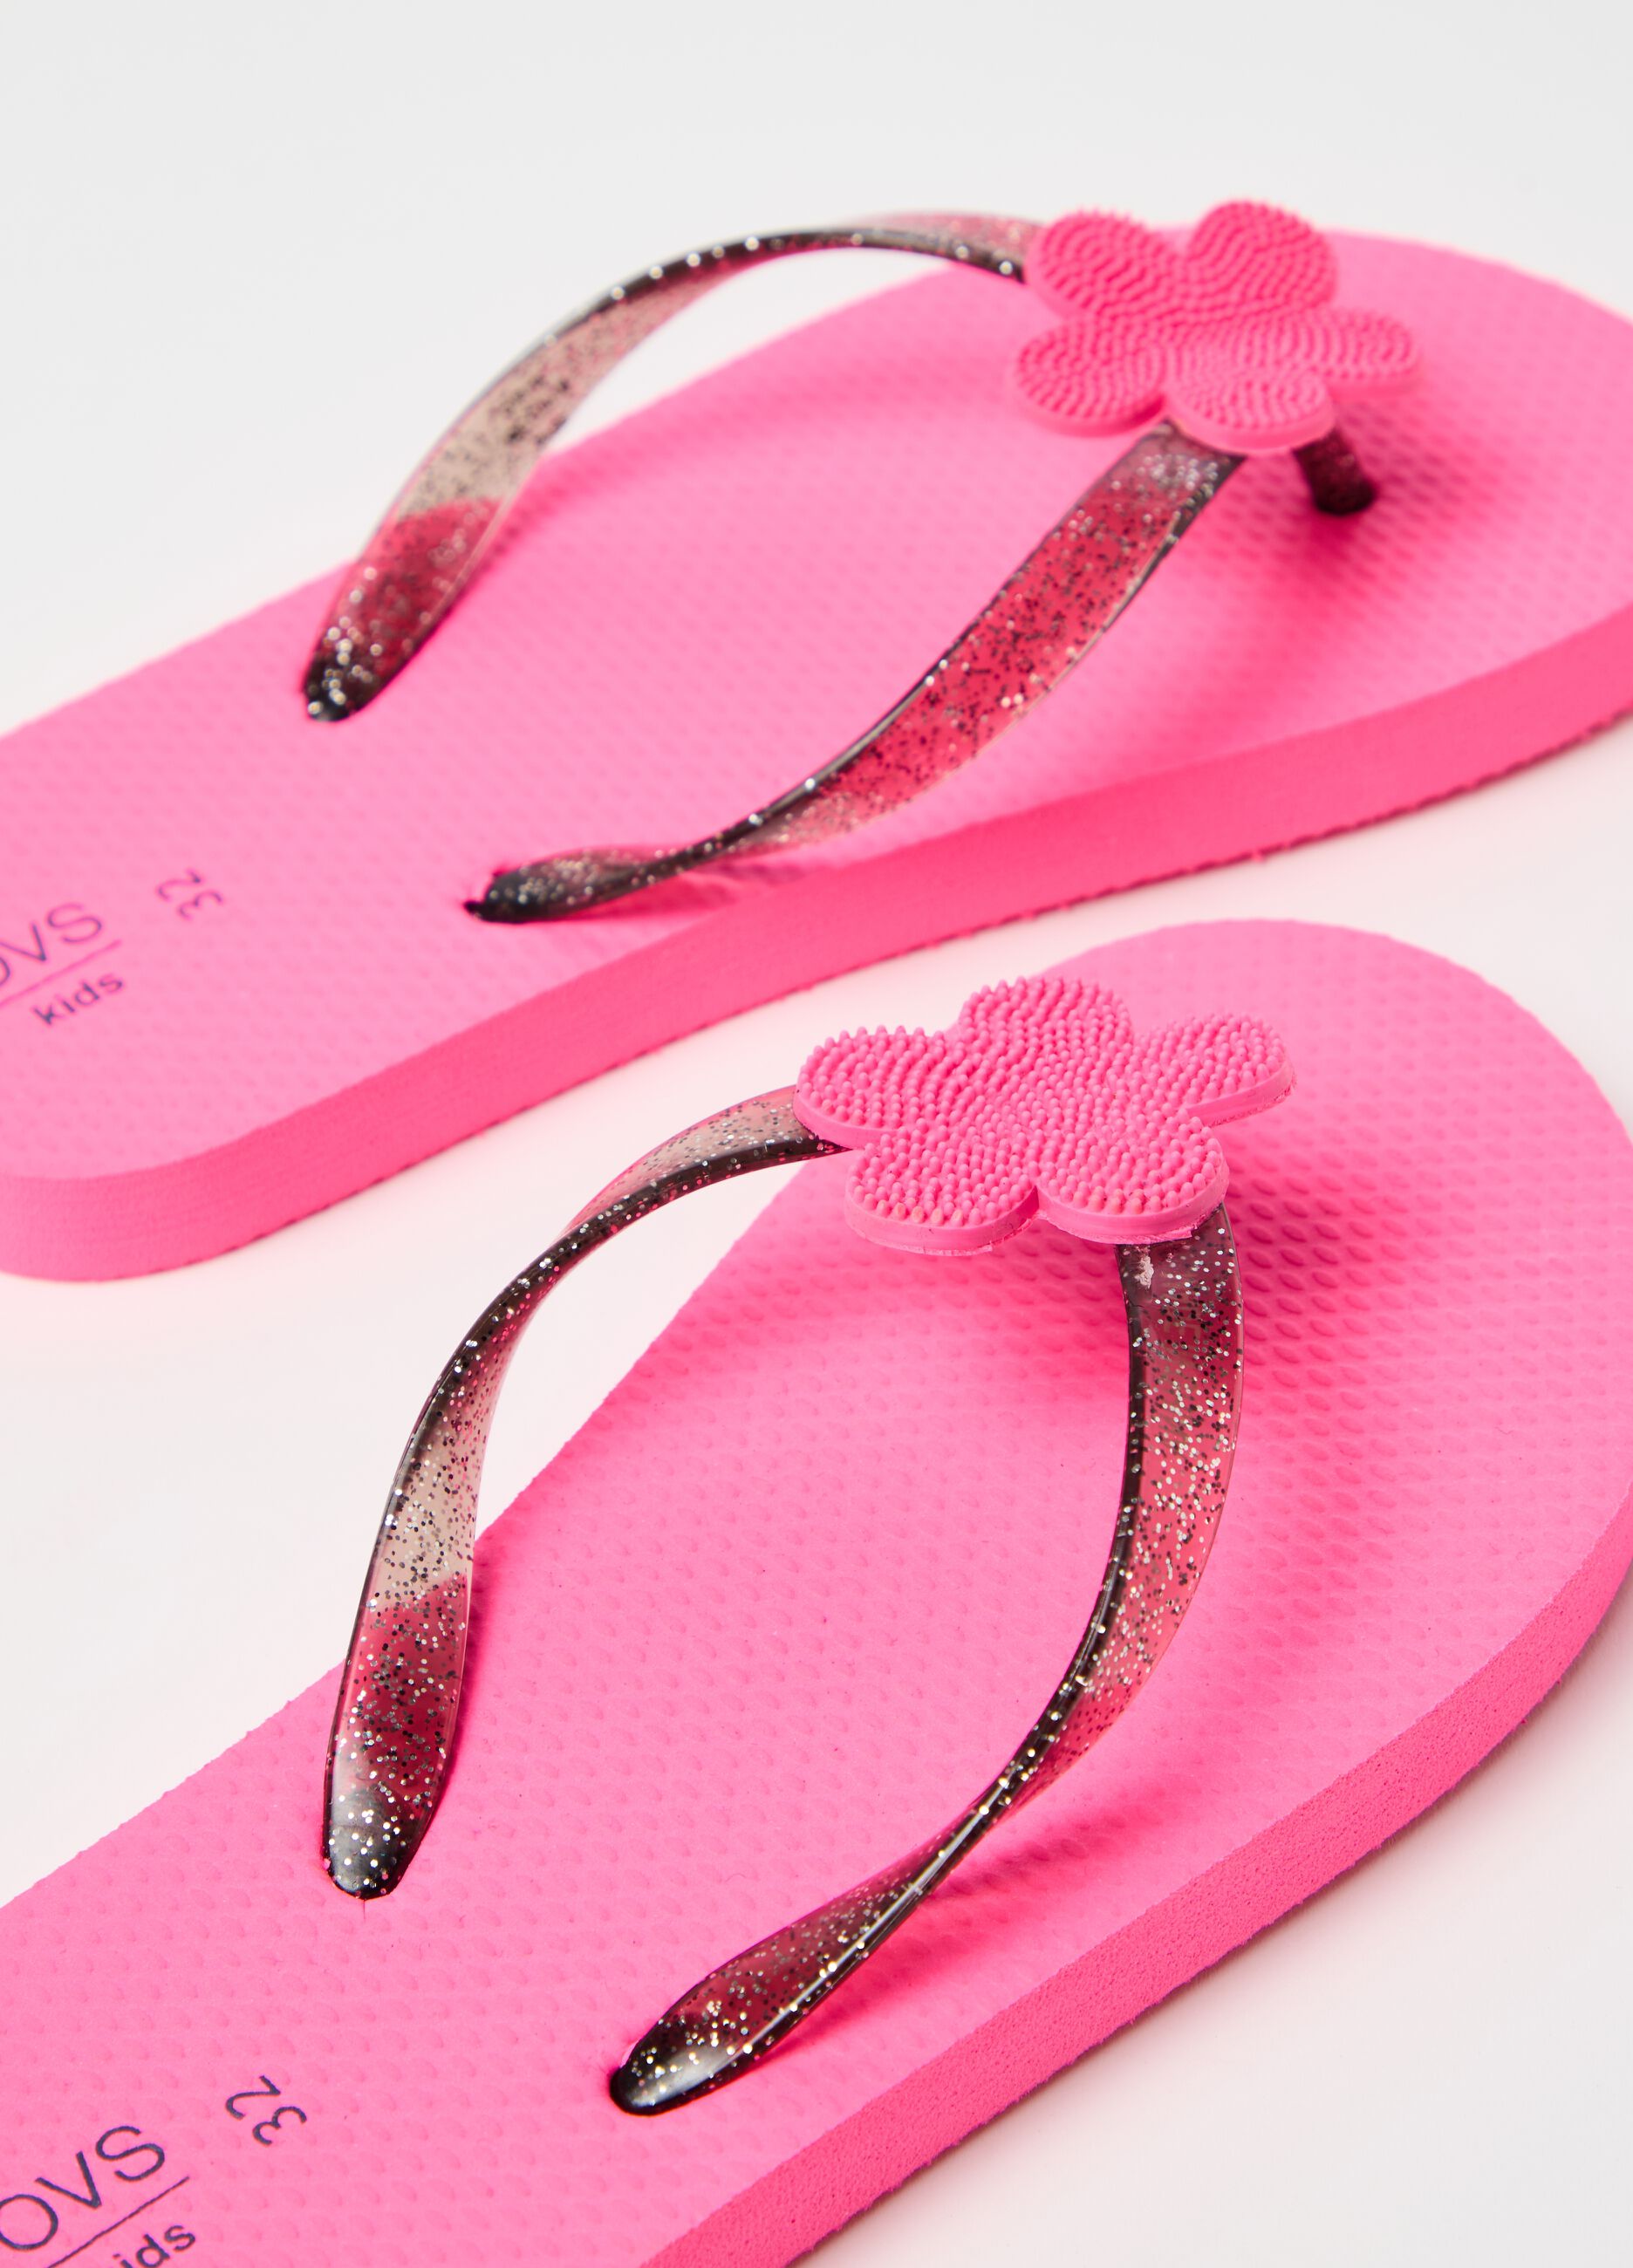 Thong sandals with glitter bands